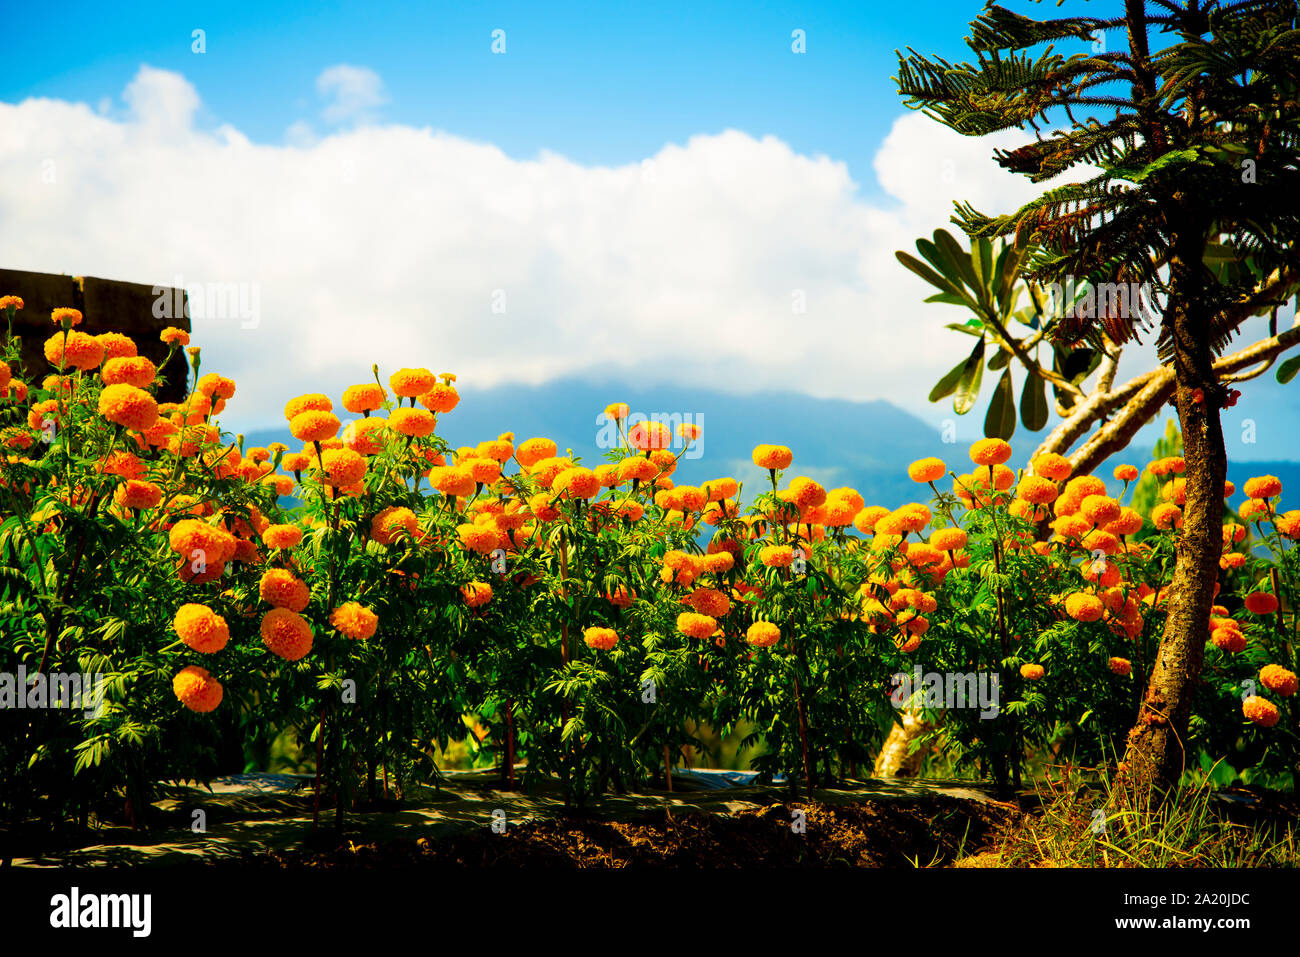 Field of Marigold Flowers - Indonesia Stock Photo